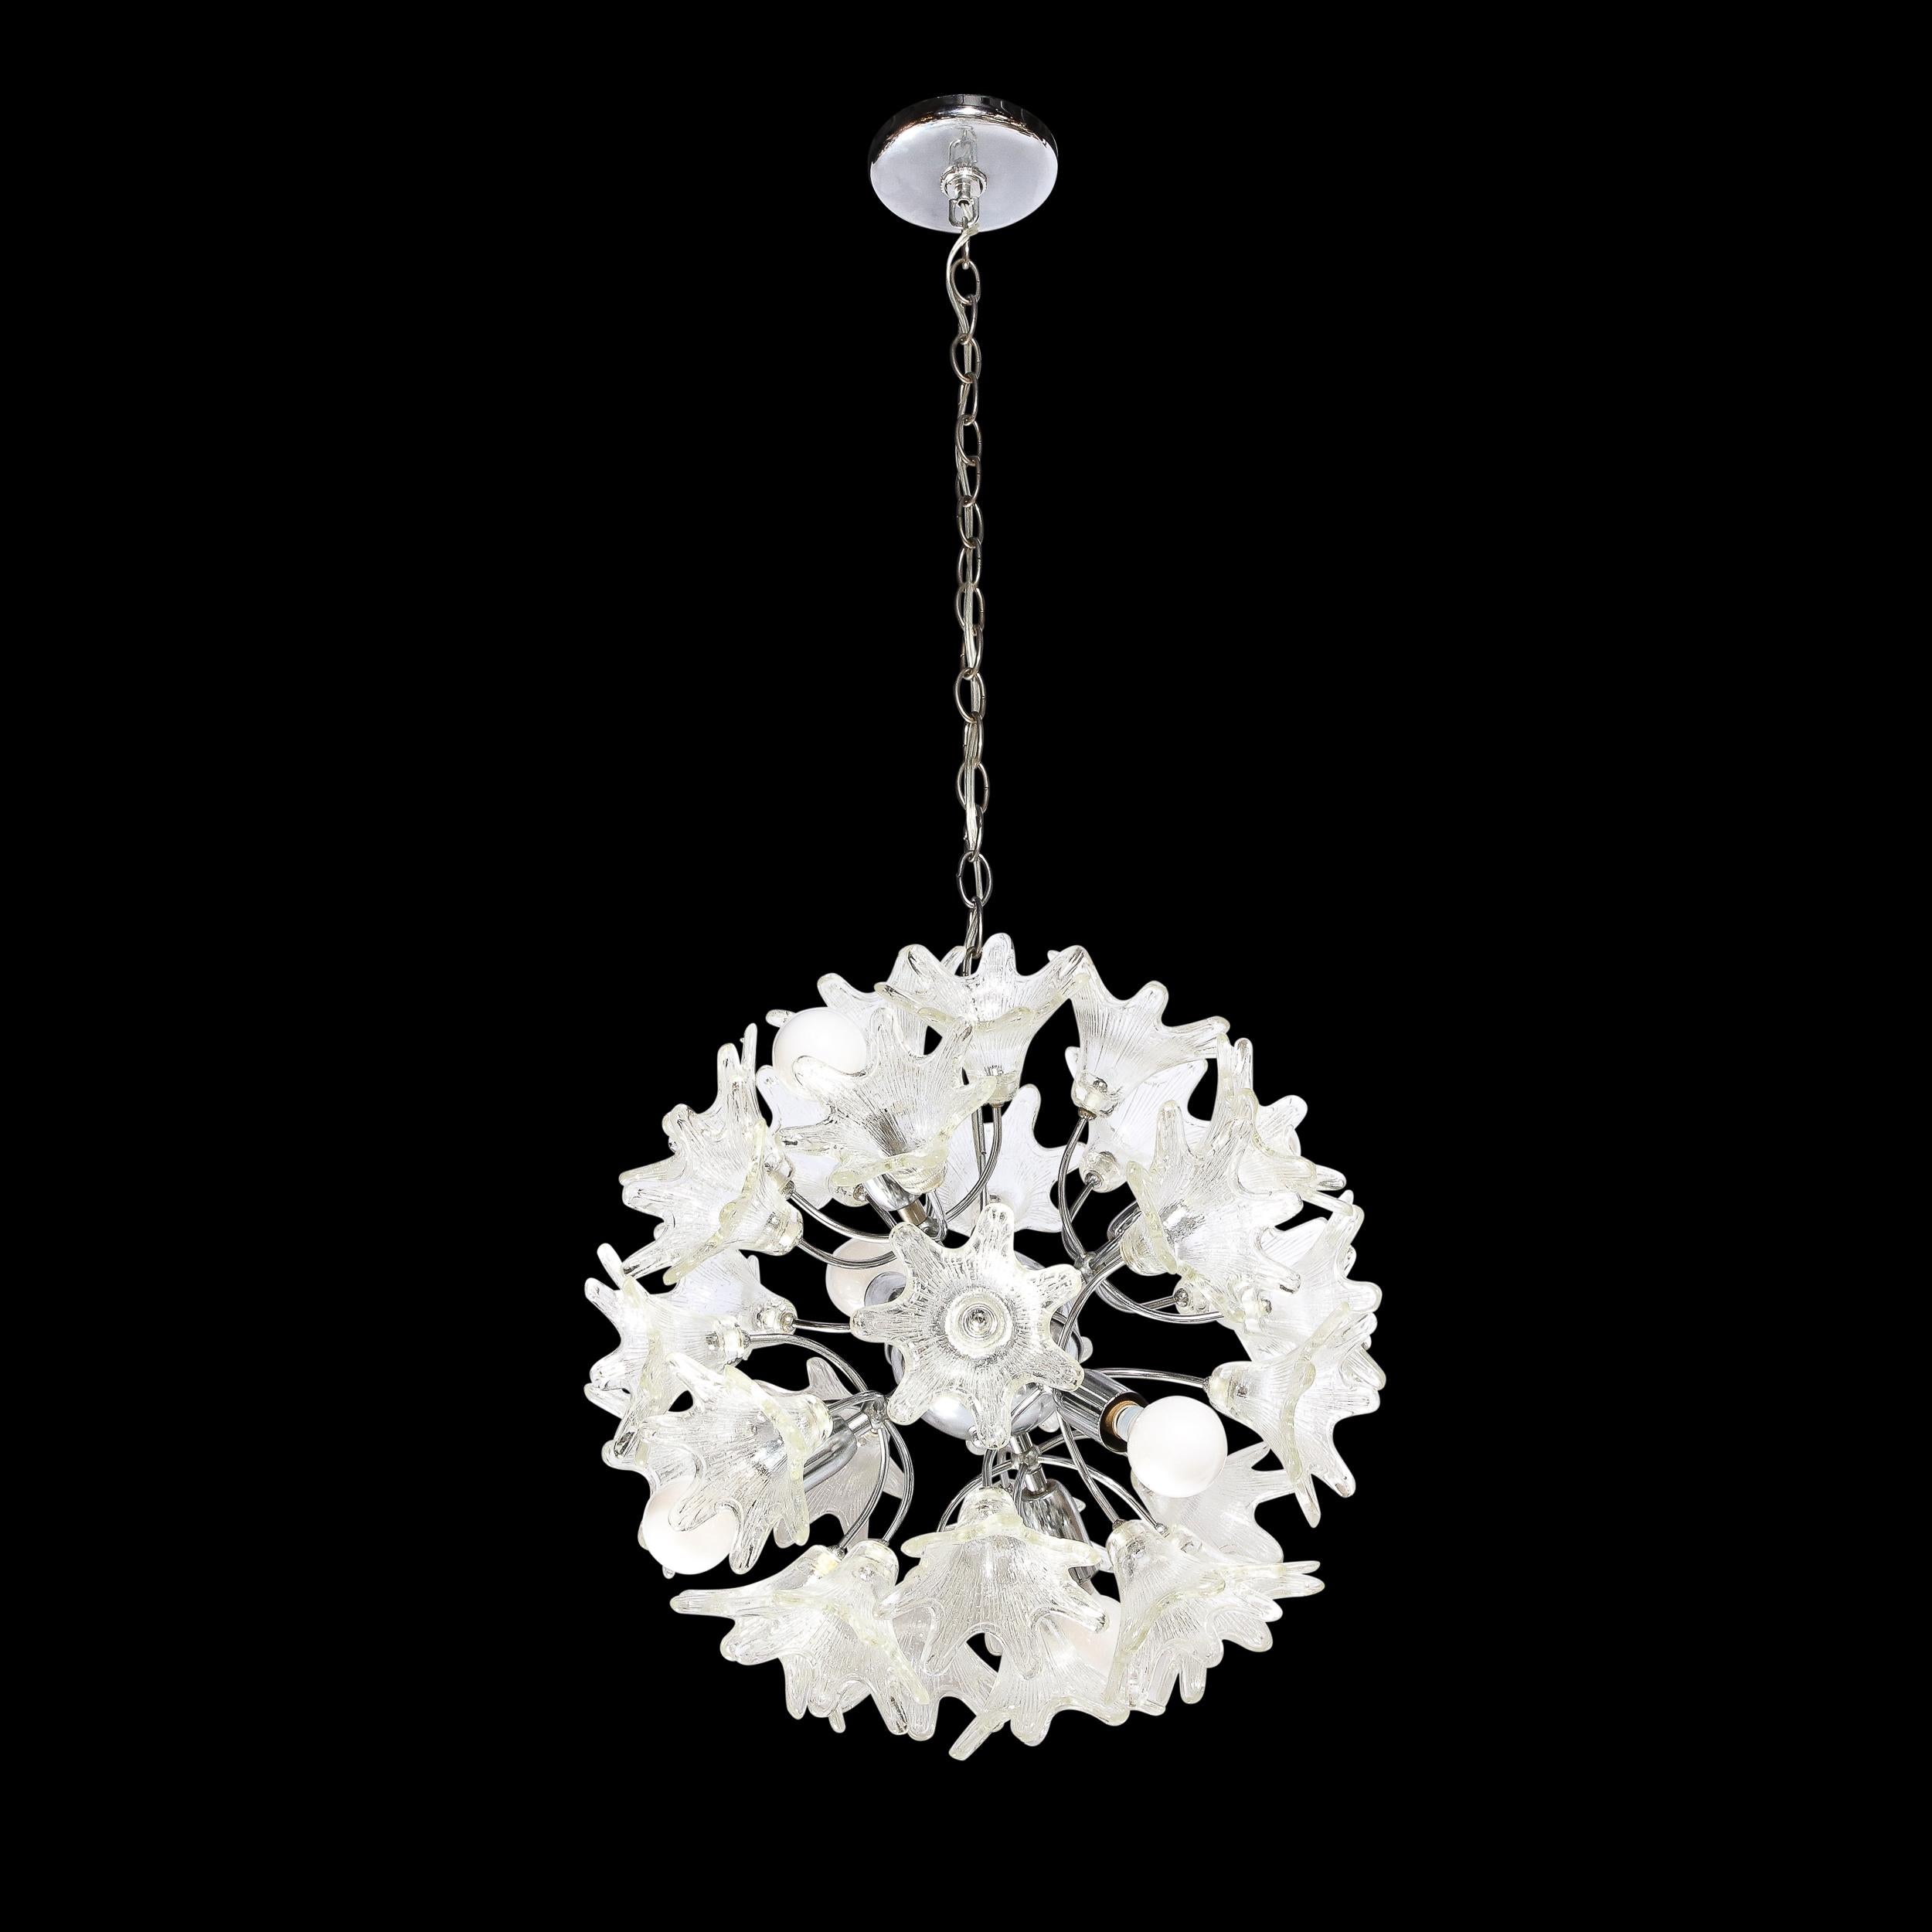 This beautiful modernist Floral Sputnik form Pendant Chandelier is composed in a Chrome frame with Hand-Blown Translucent Glass Shades, originating from Murano, Italy, Circa 1970. With a classical feeling in highly modern form and unique technical